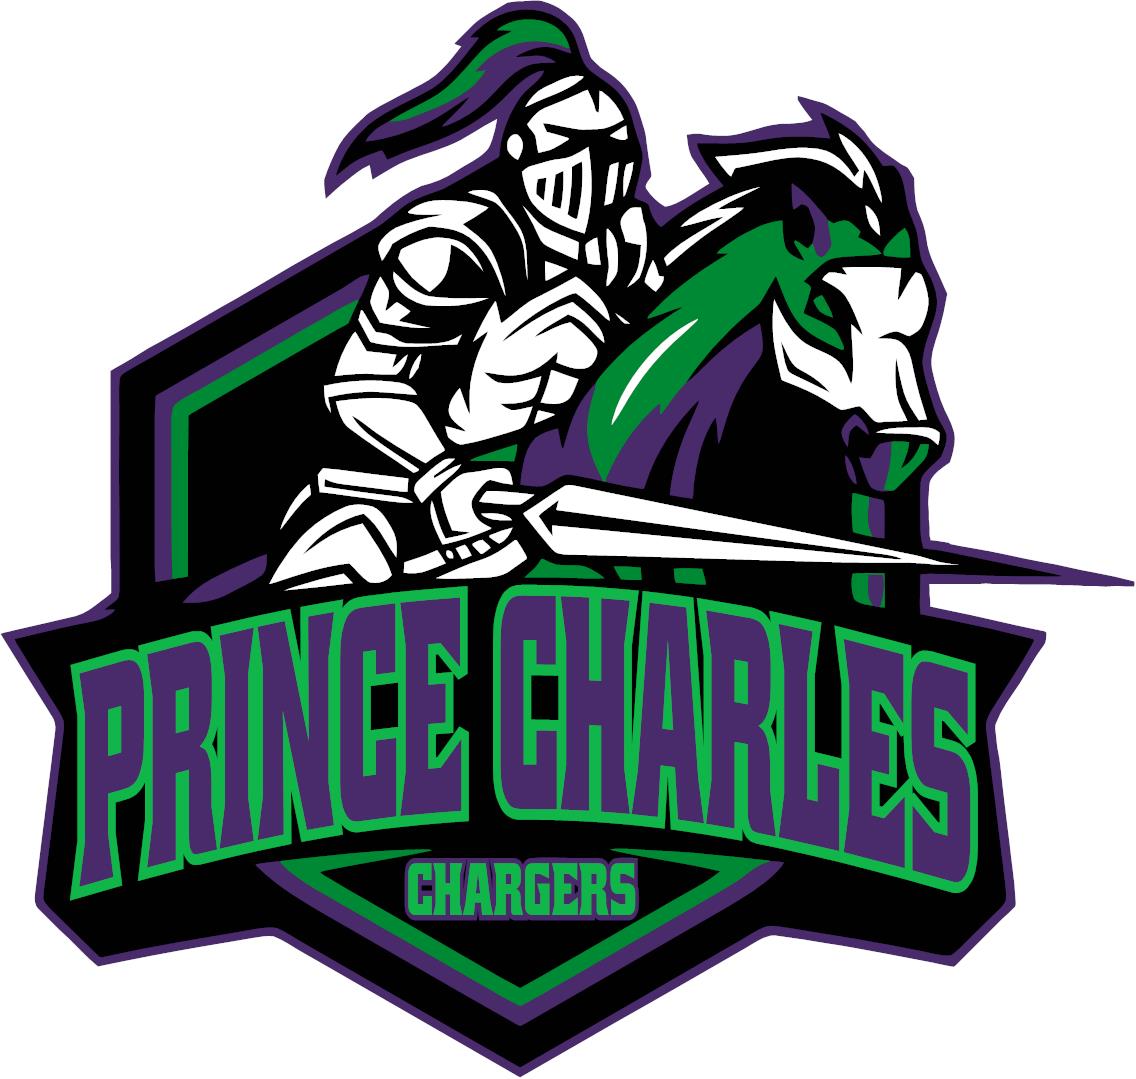 Prince Charles Chargers